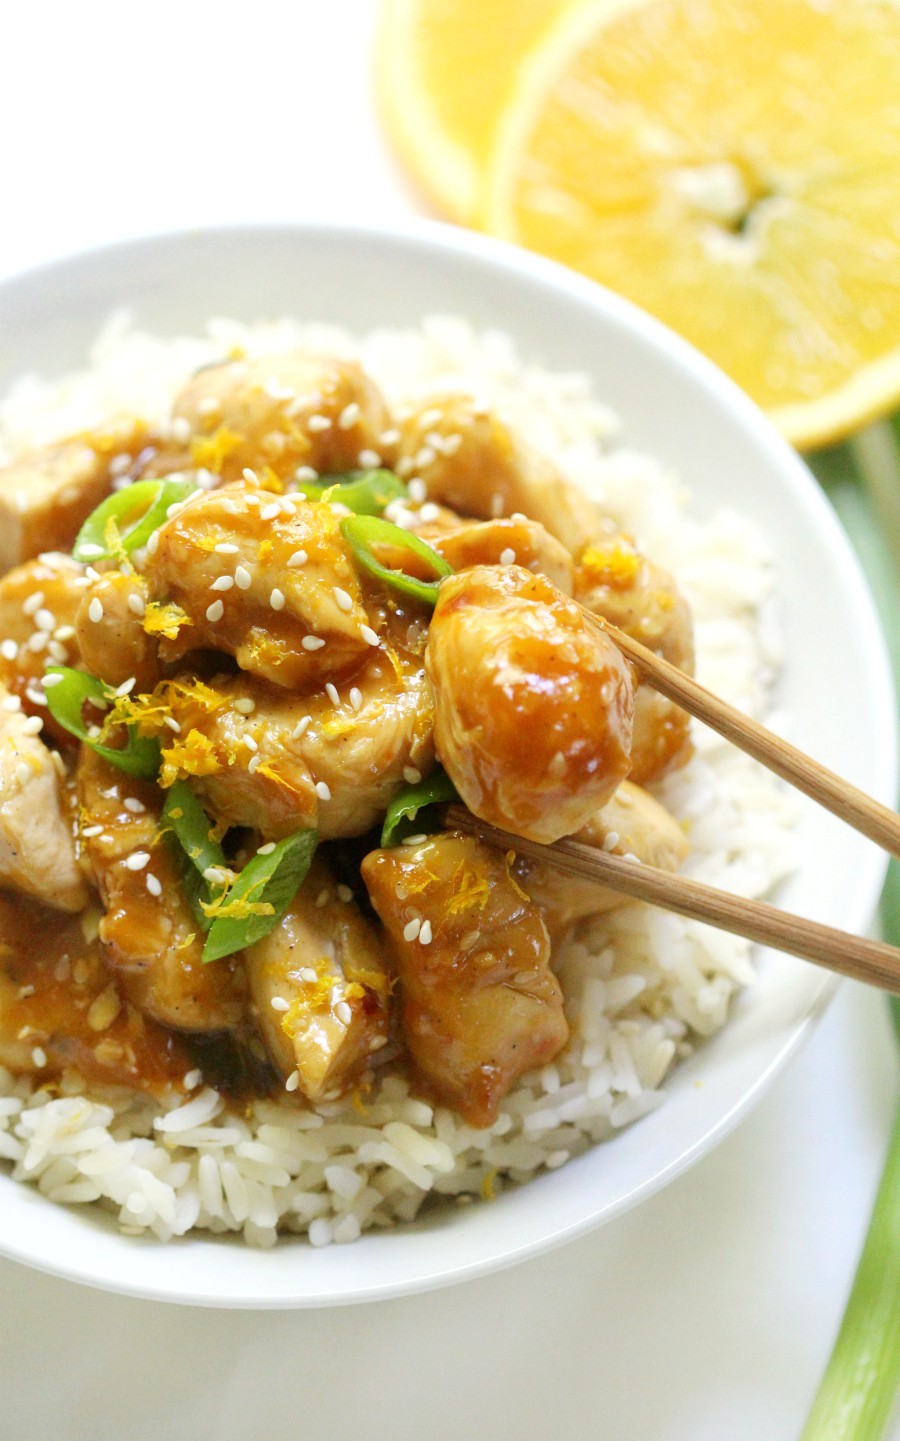 Gluten-Free Orange Chicken (Soy-Free, Top-8 Allergy-Free) | Strength and Sunshine @RebeccaGF666 Easy Chinese take-out made right at home! This Gluten-Free Orange Chicken recipe is not only soy-free, but top-8 allergy-free, quick to make, & a whole lot healthier! With a sticky, sweet, & spicy homemade orange sauce, this remake on the classic take-out will be a new favorite dinner option (with killer leftovers!) #orangechicken #chicken #takeout #glutenfree #soyfree #nutfree #chinesefood